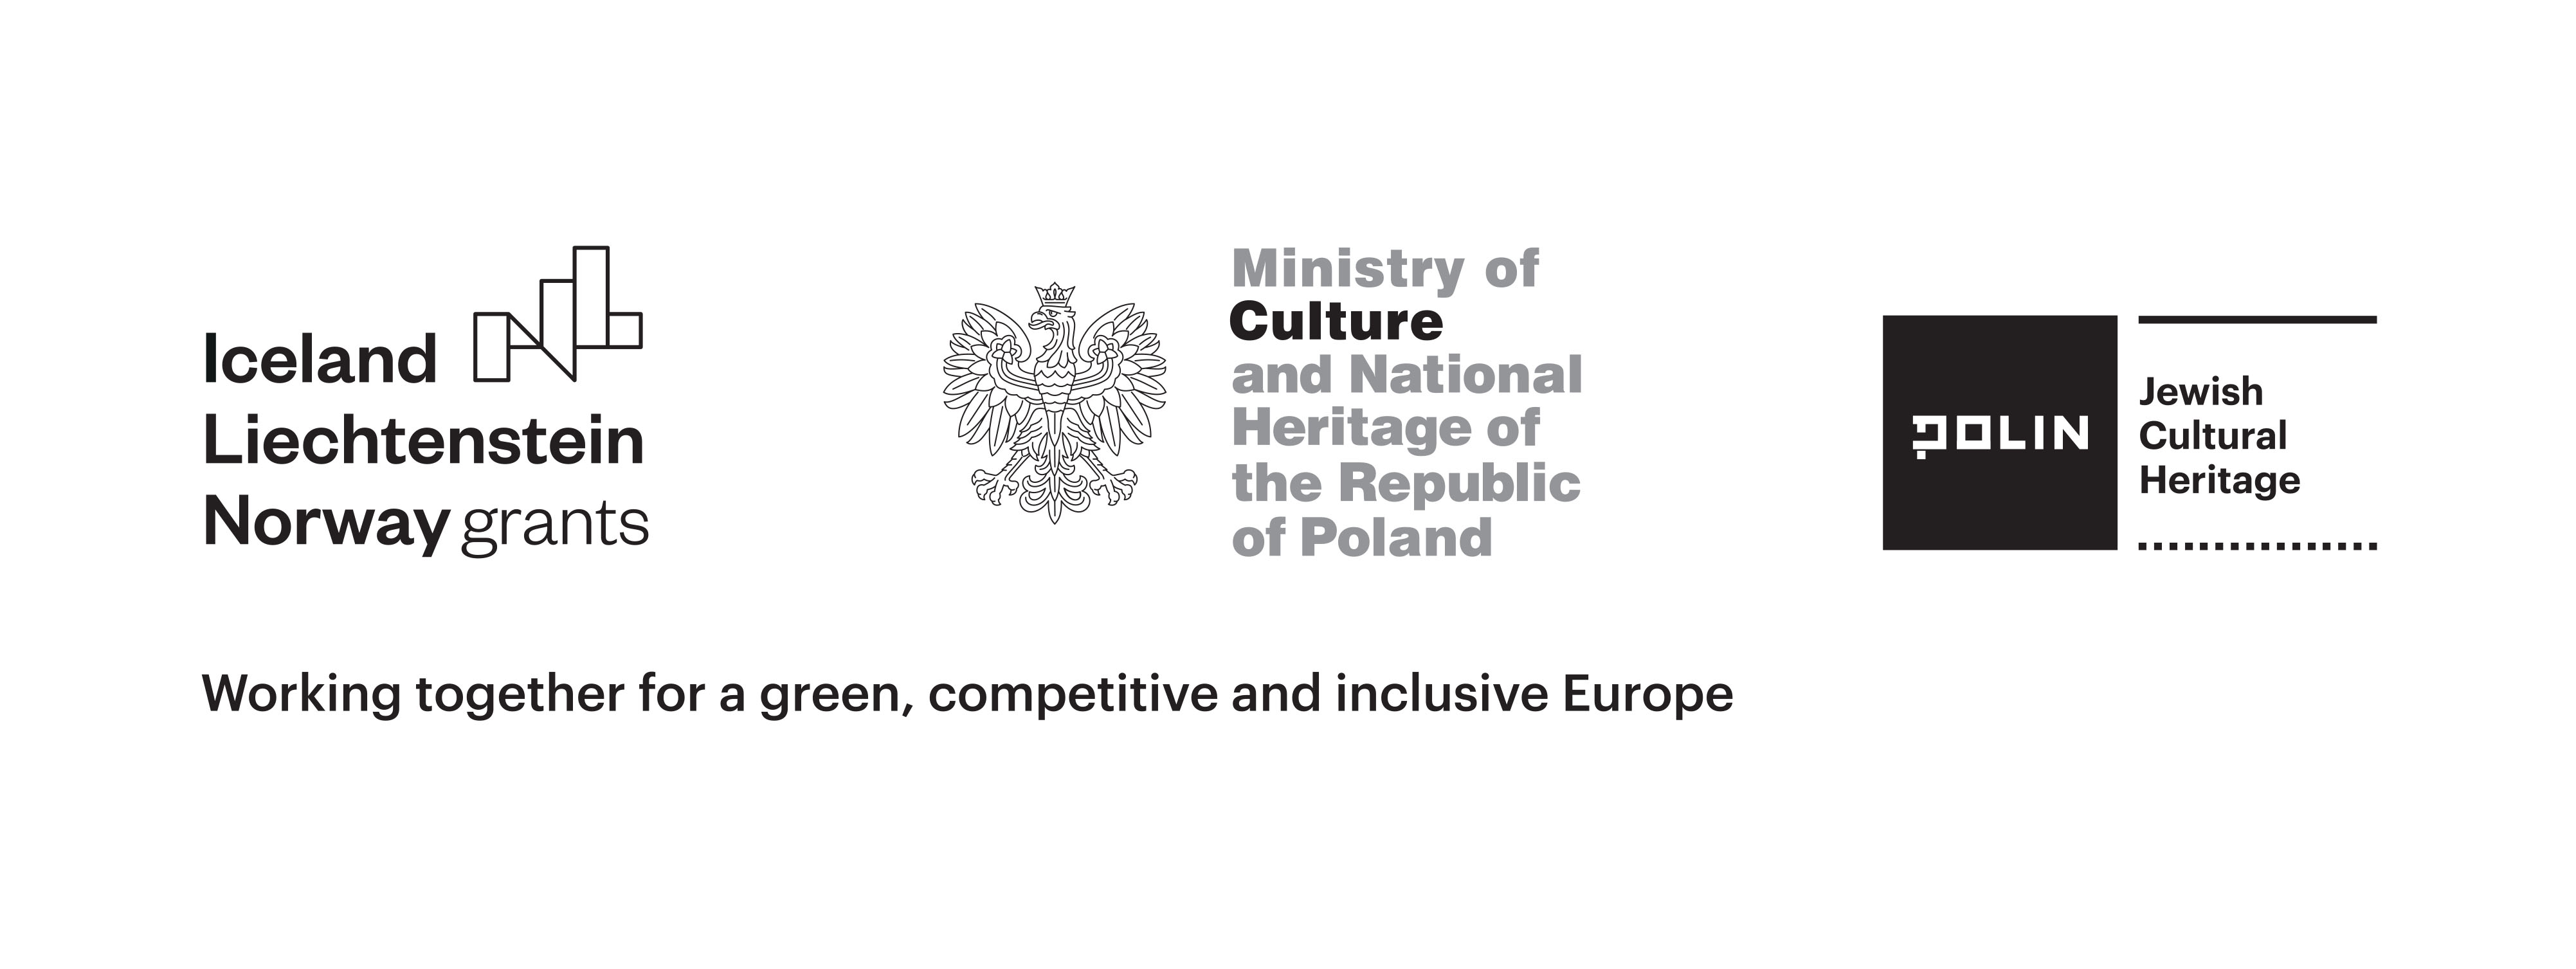 Logo of Jewish Cultural Heritage Project: from right side: logo of Norway grants, logo of Ministry of Culture and National Heritage of Republic of Poland, logo Polin Musuem and JCK project. Below sentence: Working together for green, competetive and inclusive Europe.